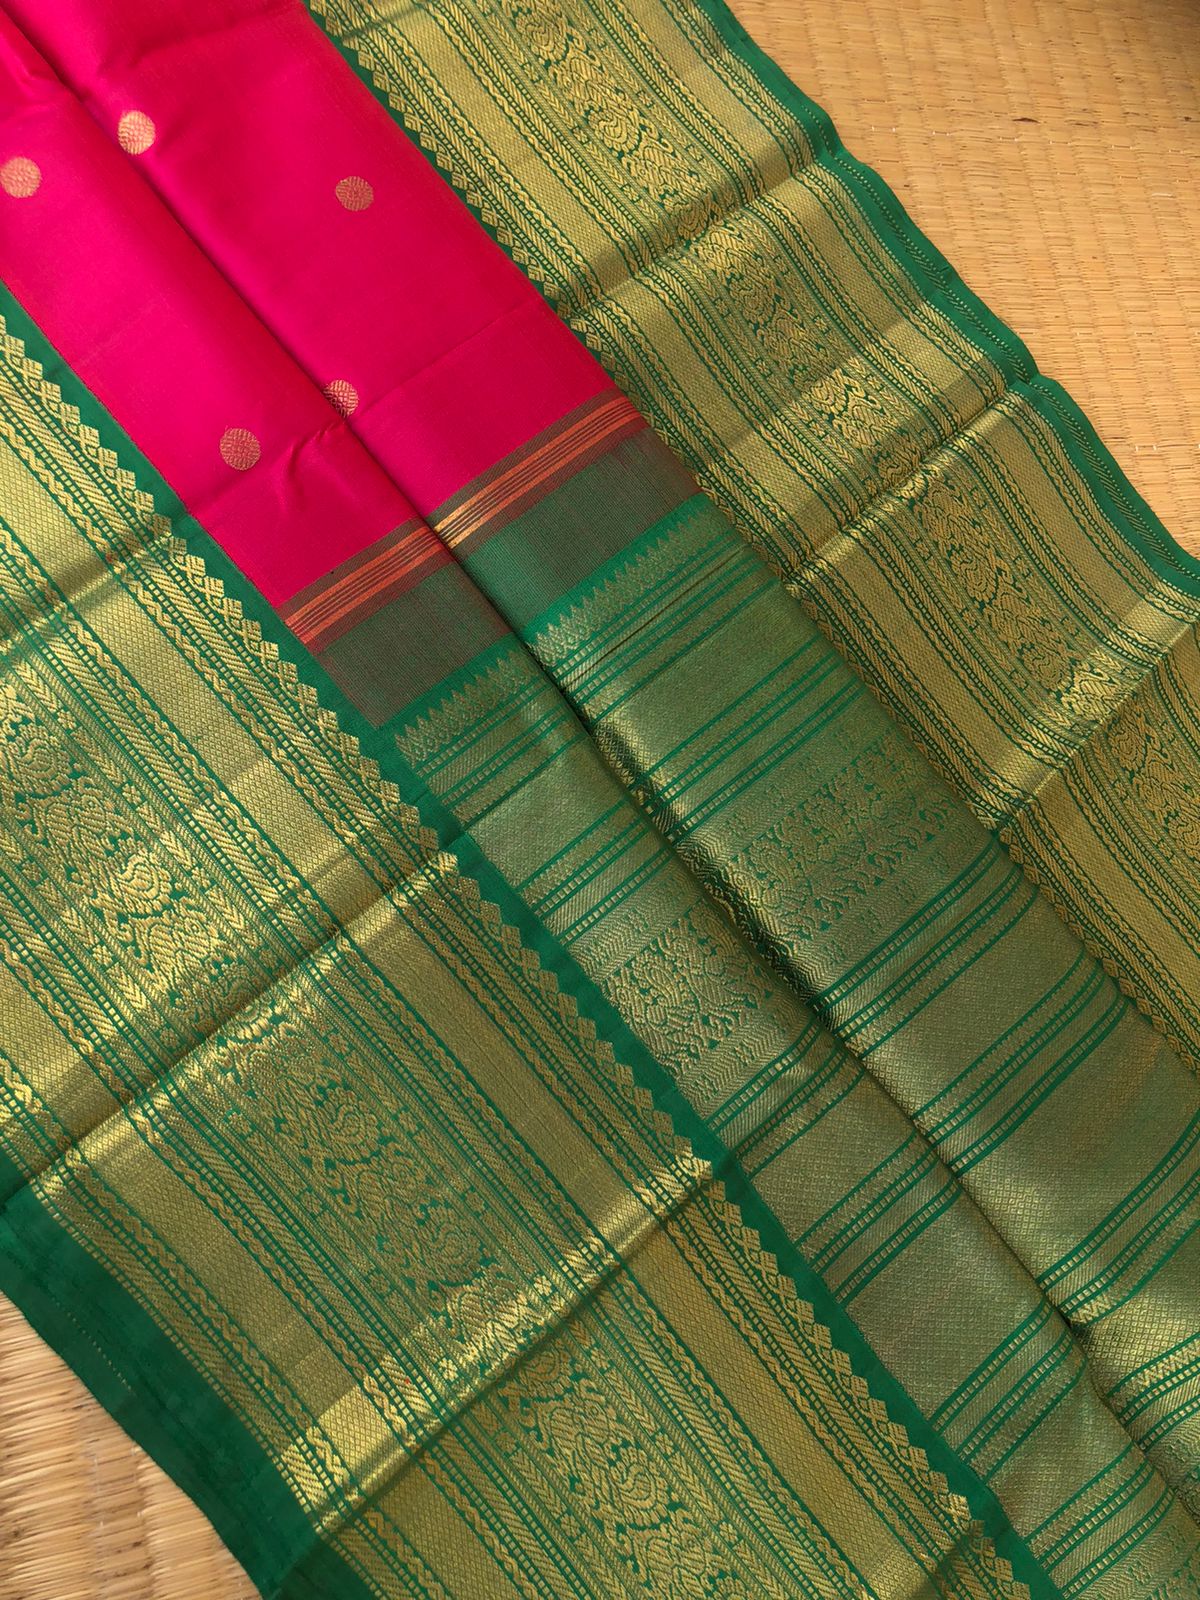 Vintage Ragas on Kanchivaram - absolutely gorgeous reddish pink mixed body with stunning grand Meenakshi green woven gold borders